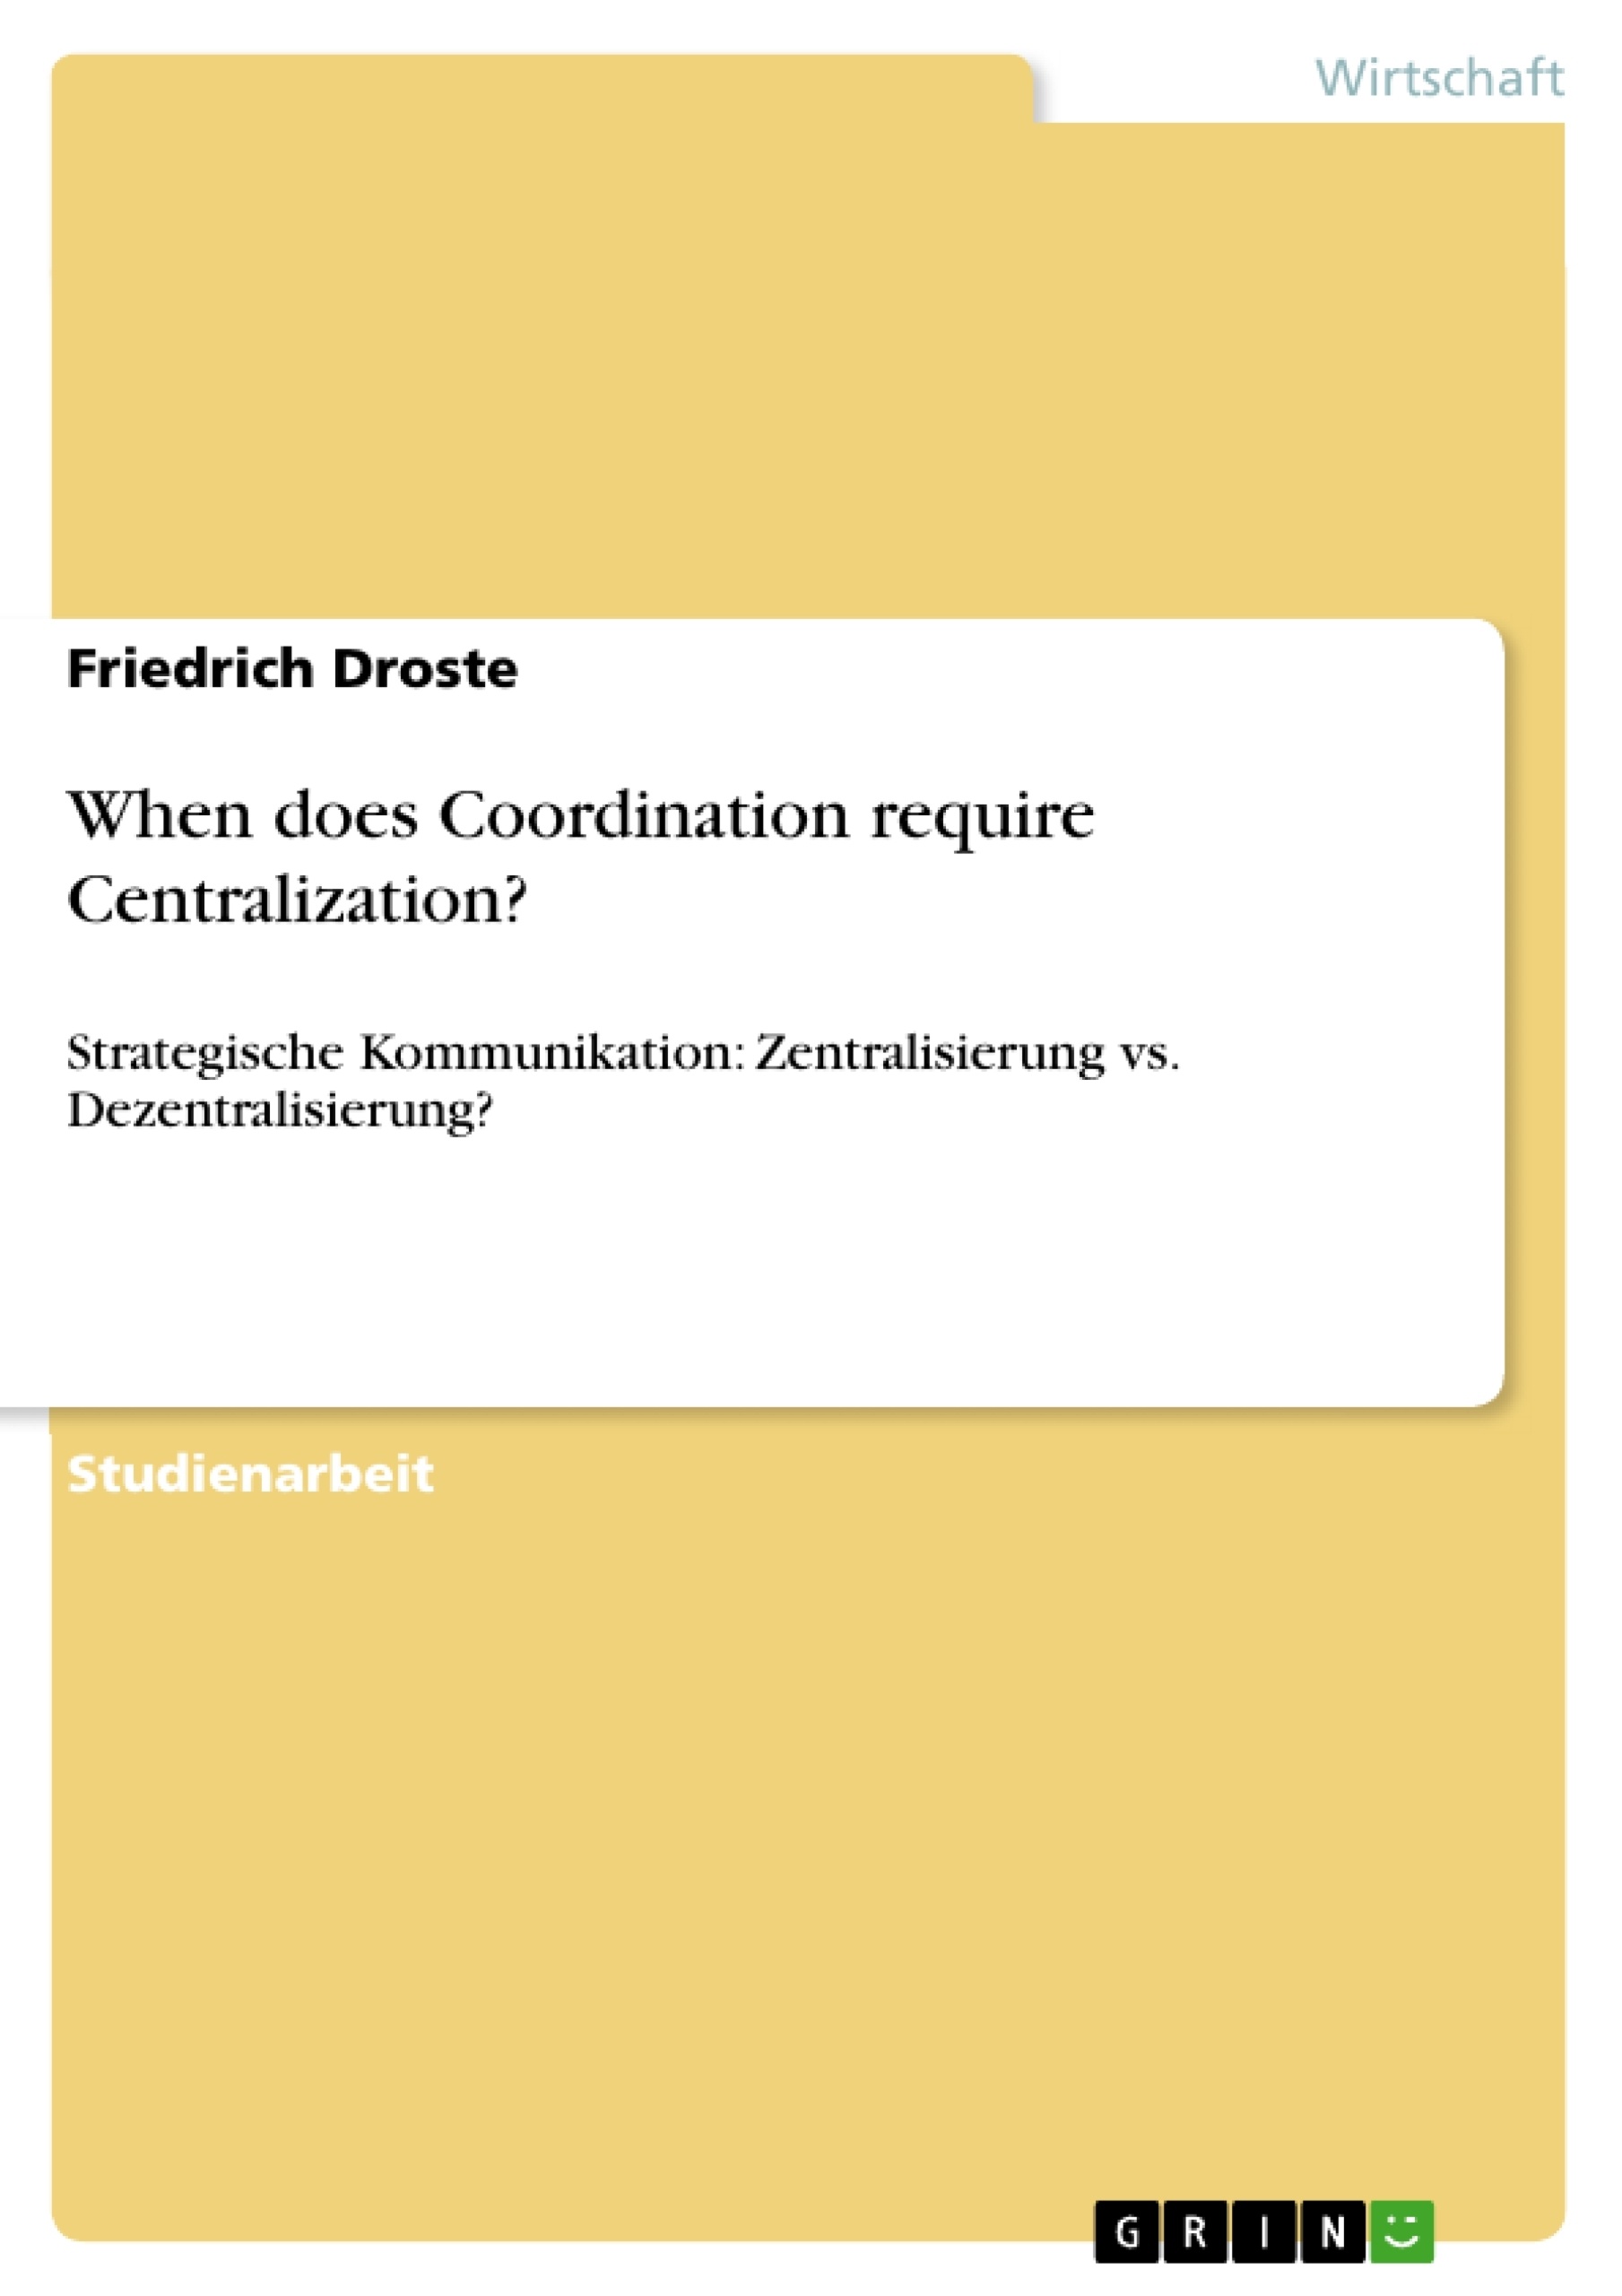 Title: When does Coordination require Centralization?